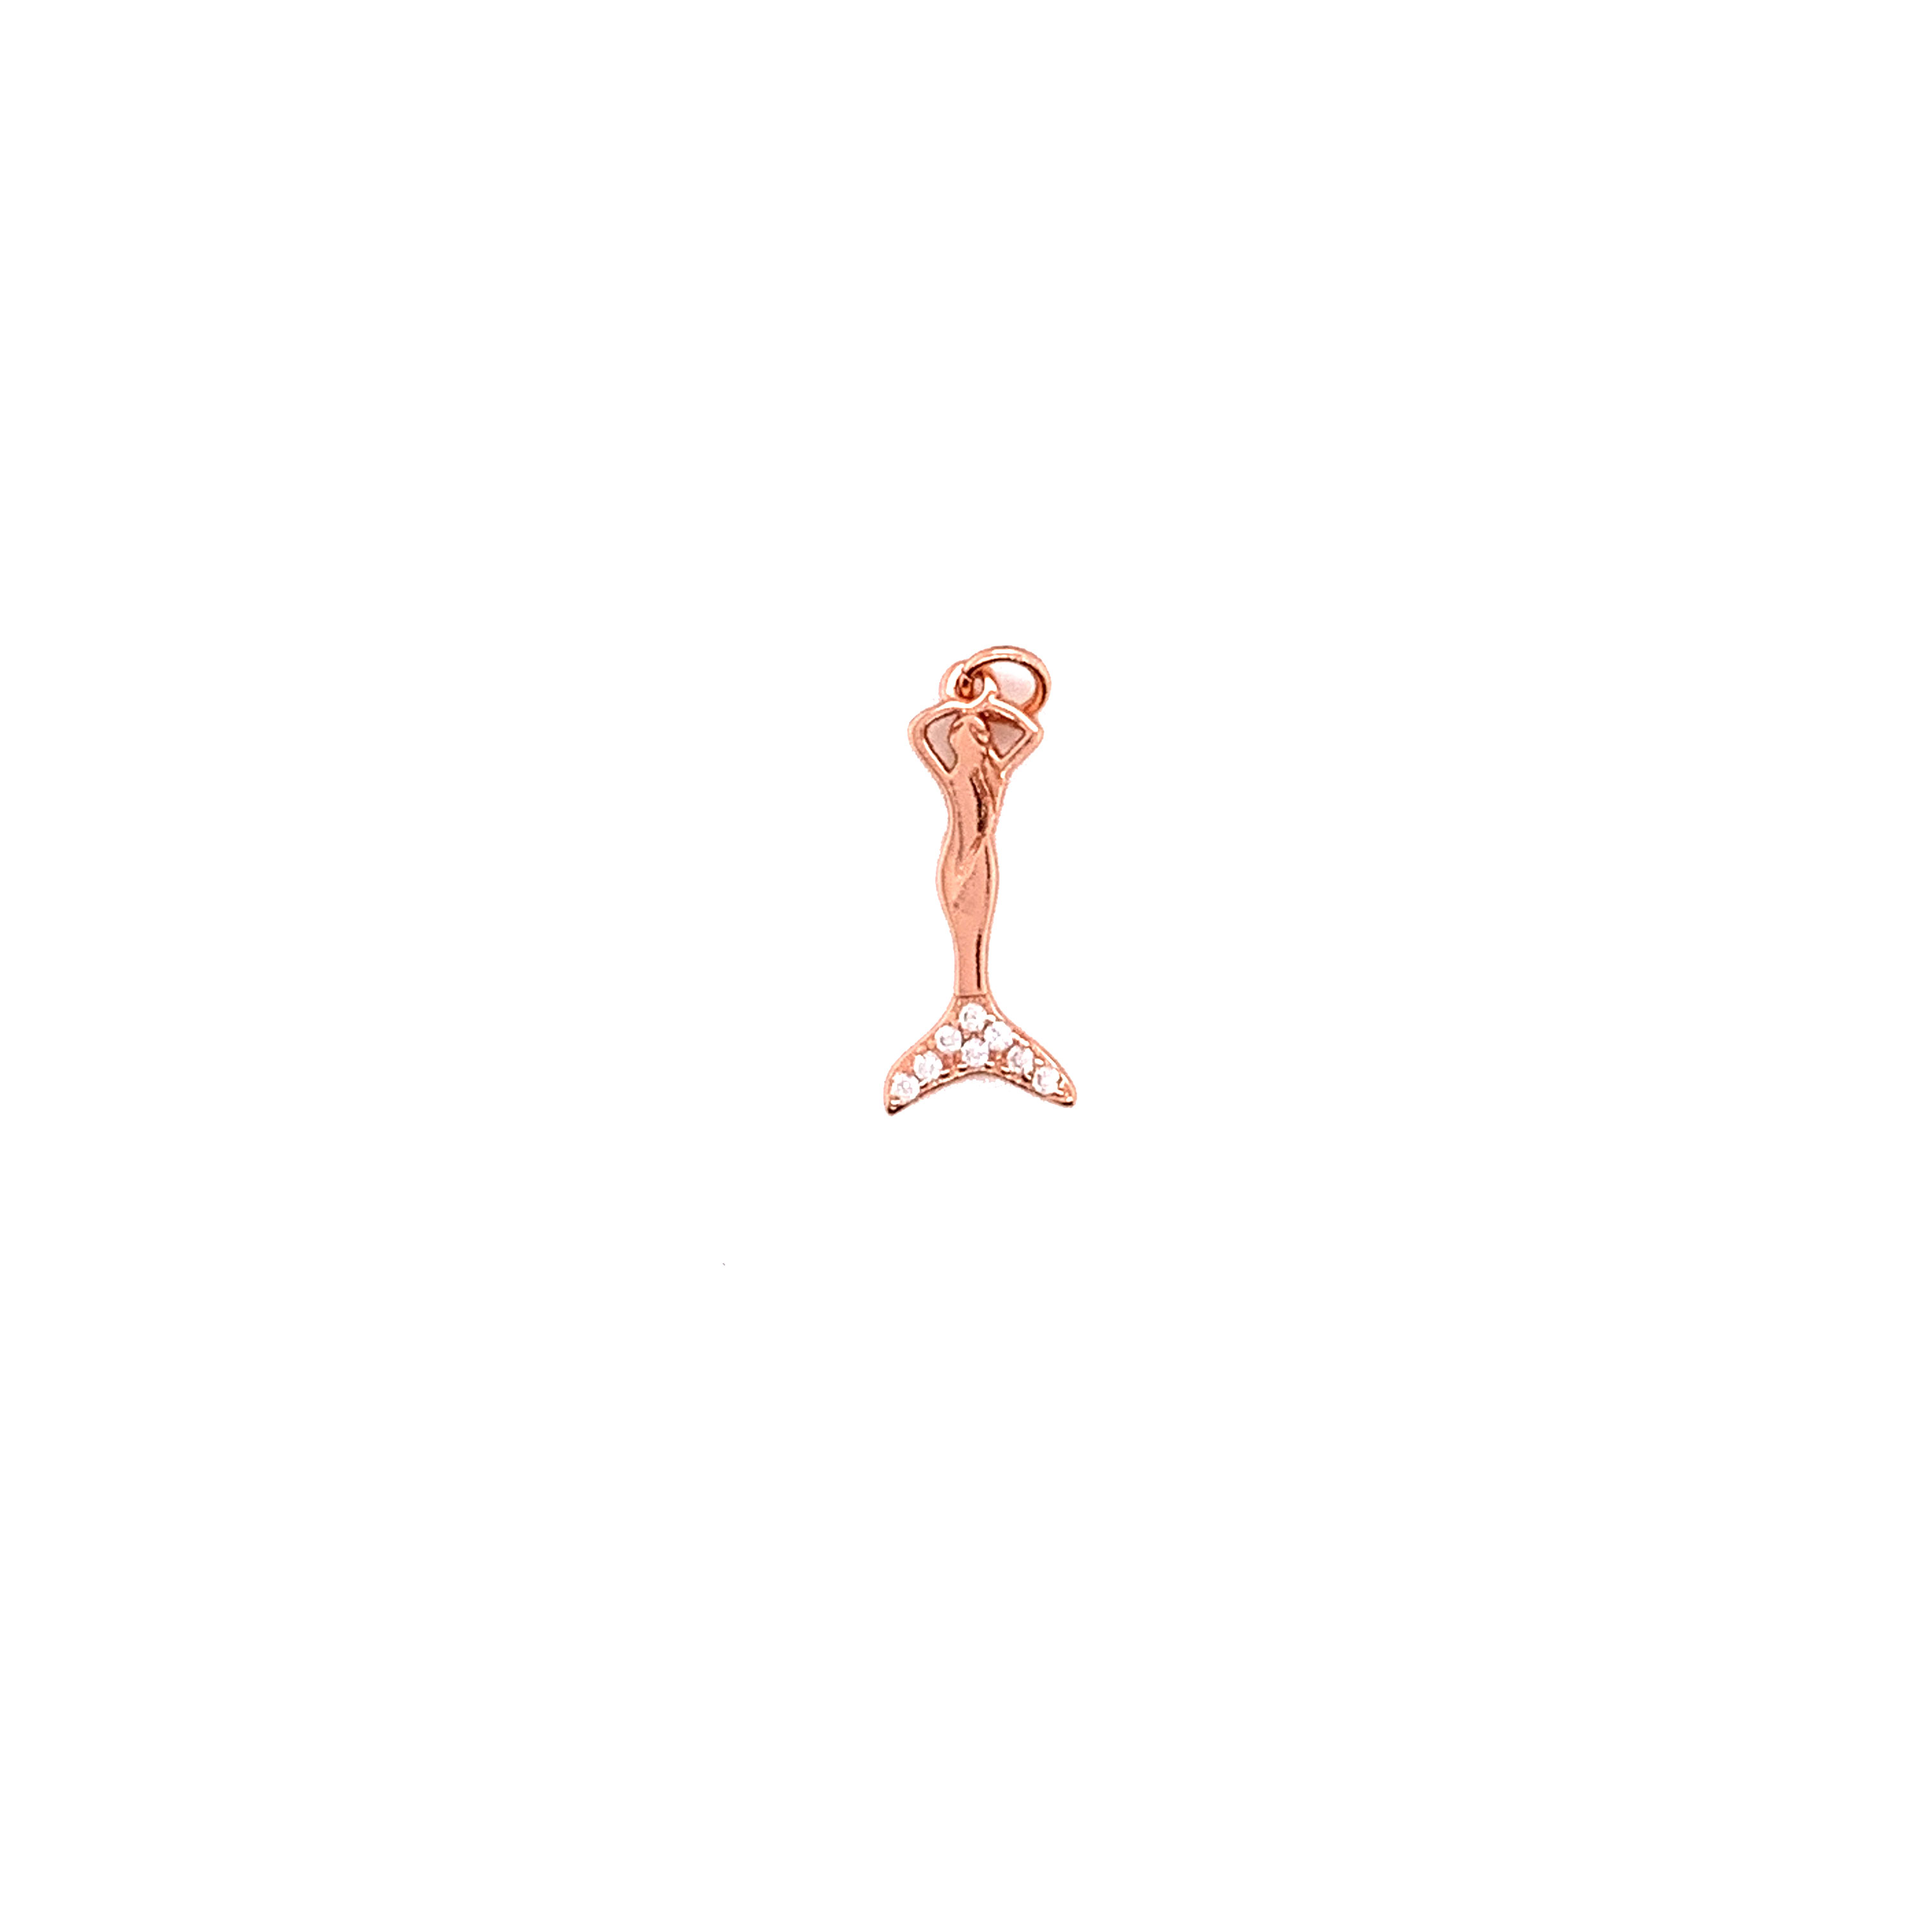 CZ Mermaid Charm - Rose Gold Plated